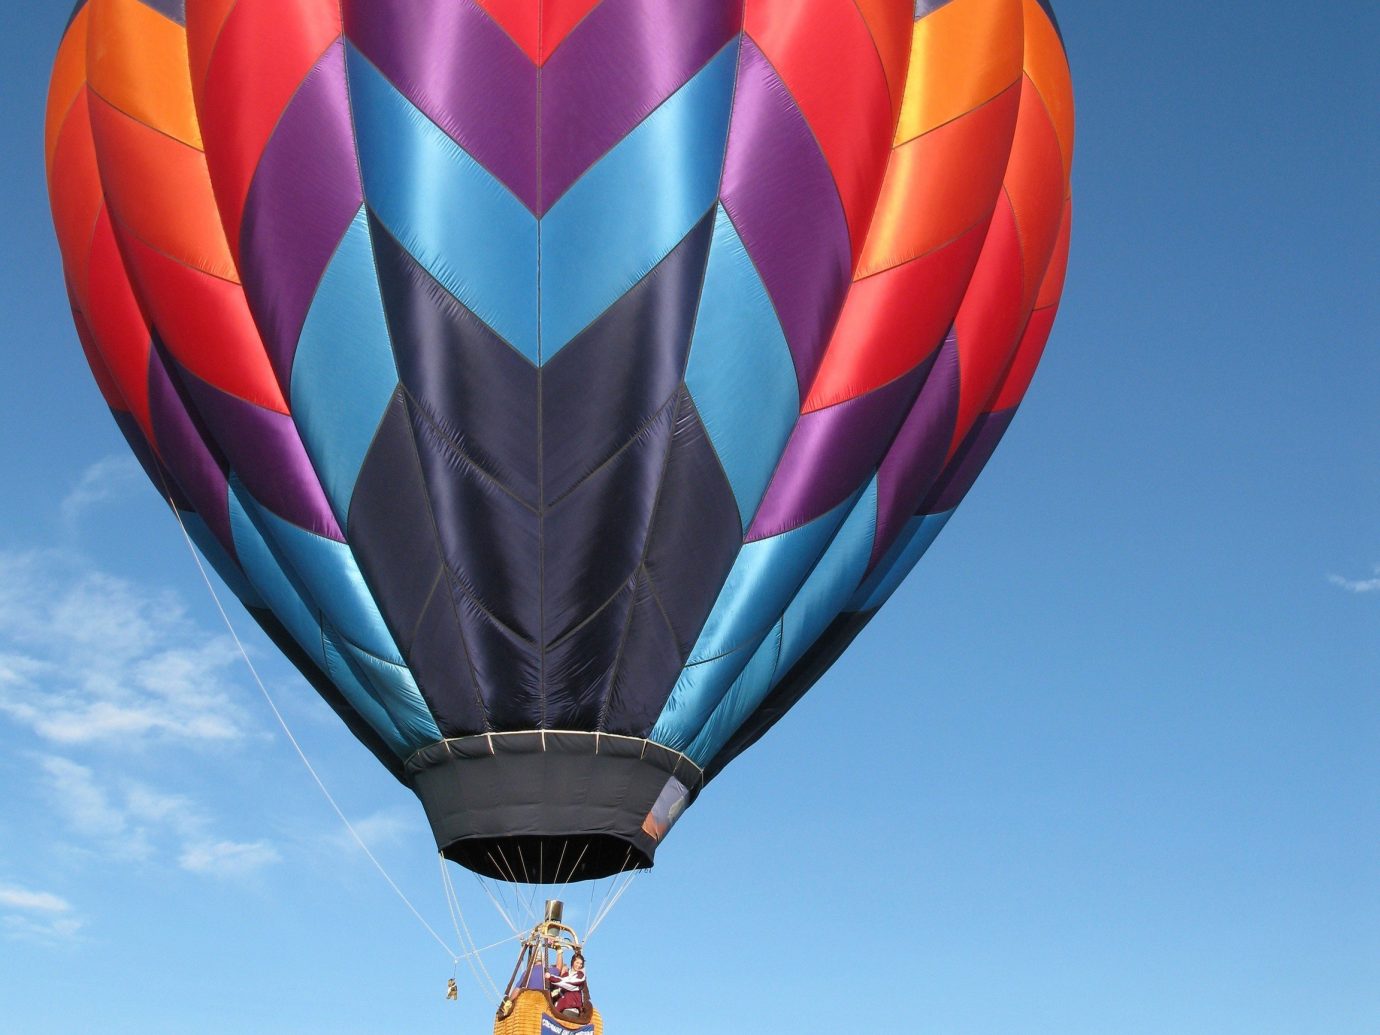 Trip Ideas balloon aircraft transport sky hot air ballooning Hot Air Balloon outdoor vehicle person toy atmosphere of earth colorful people crowd colored